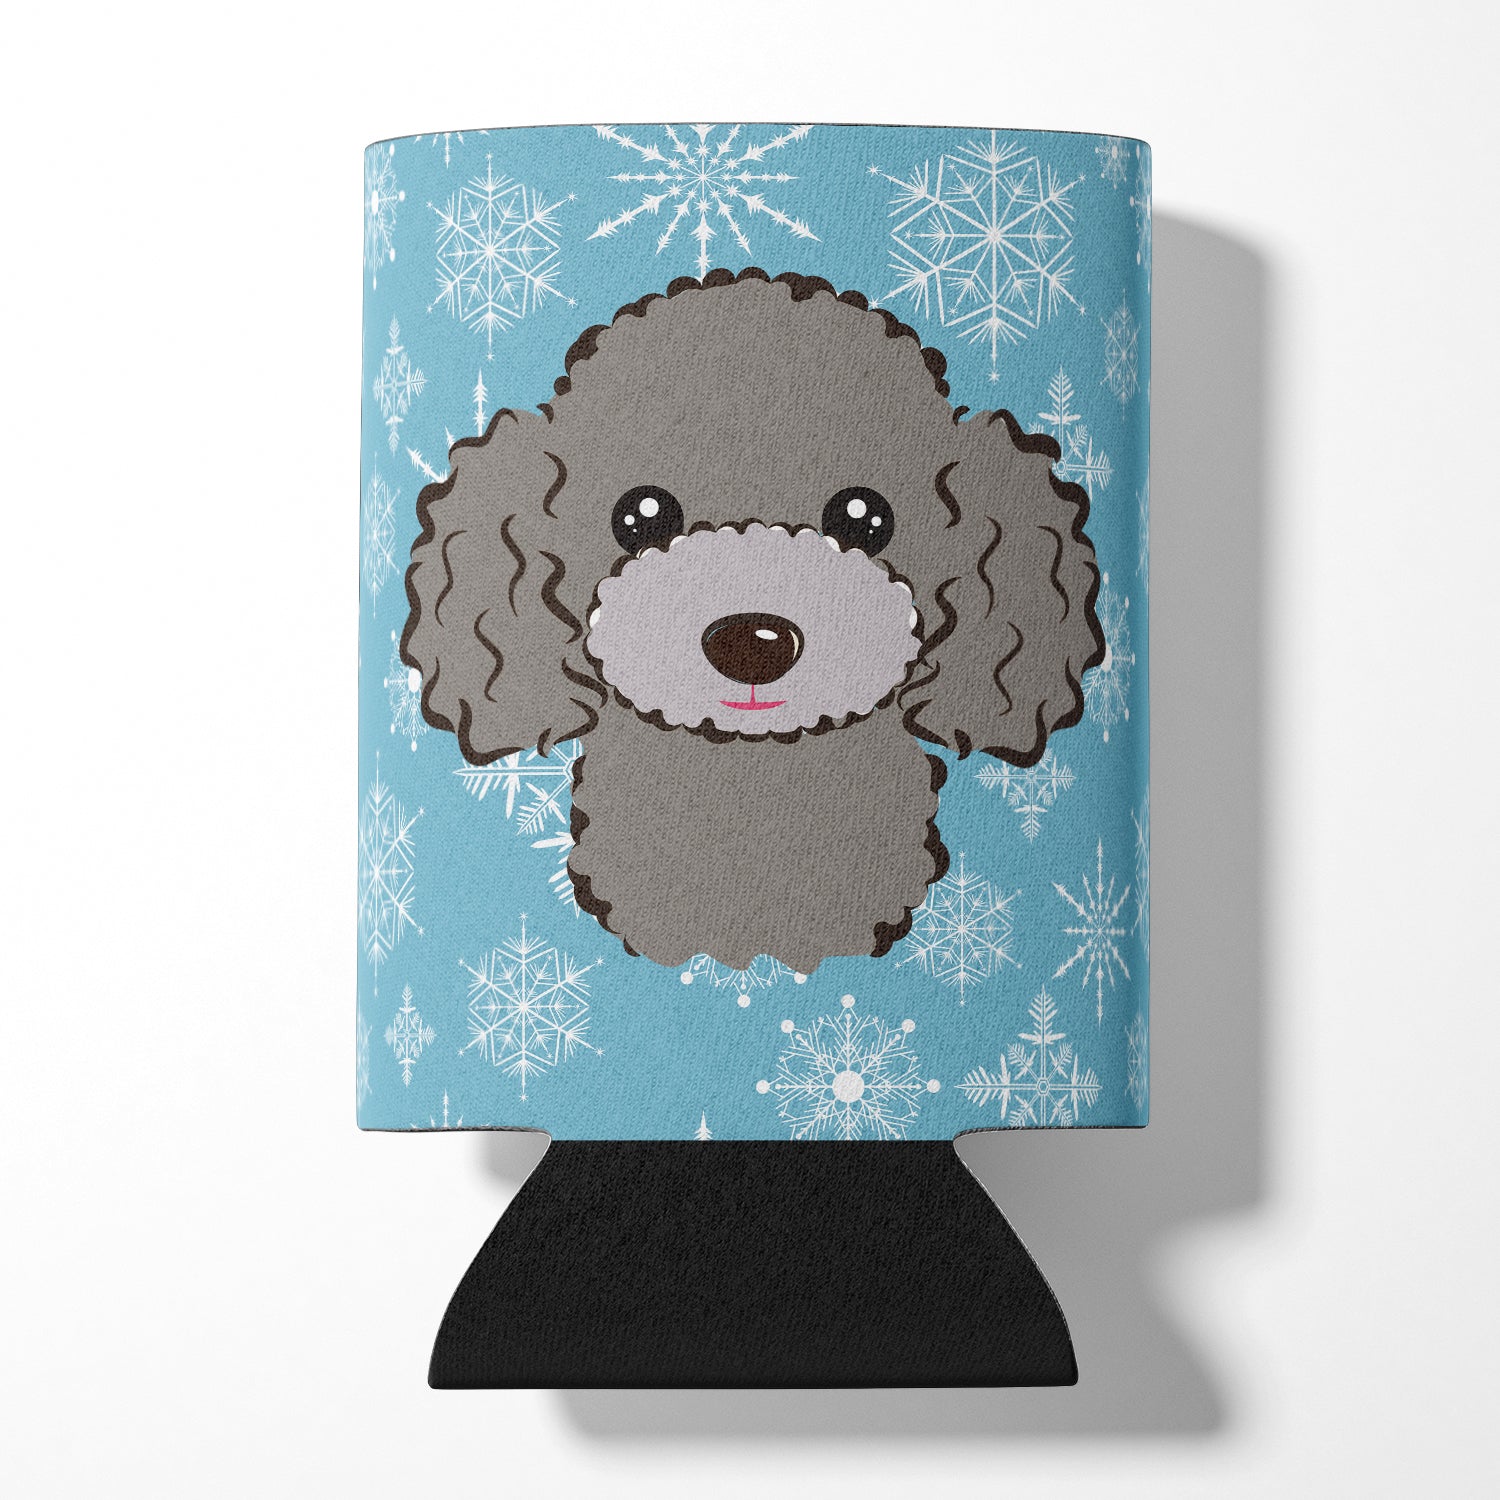 Snowflake Silver Gray Poodle Can or Bottle Hugger BB1693CC.